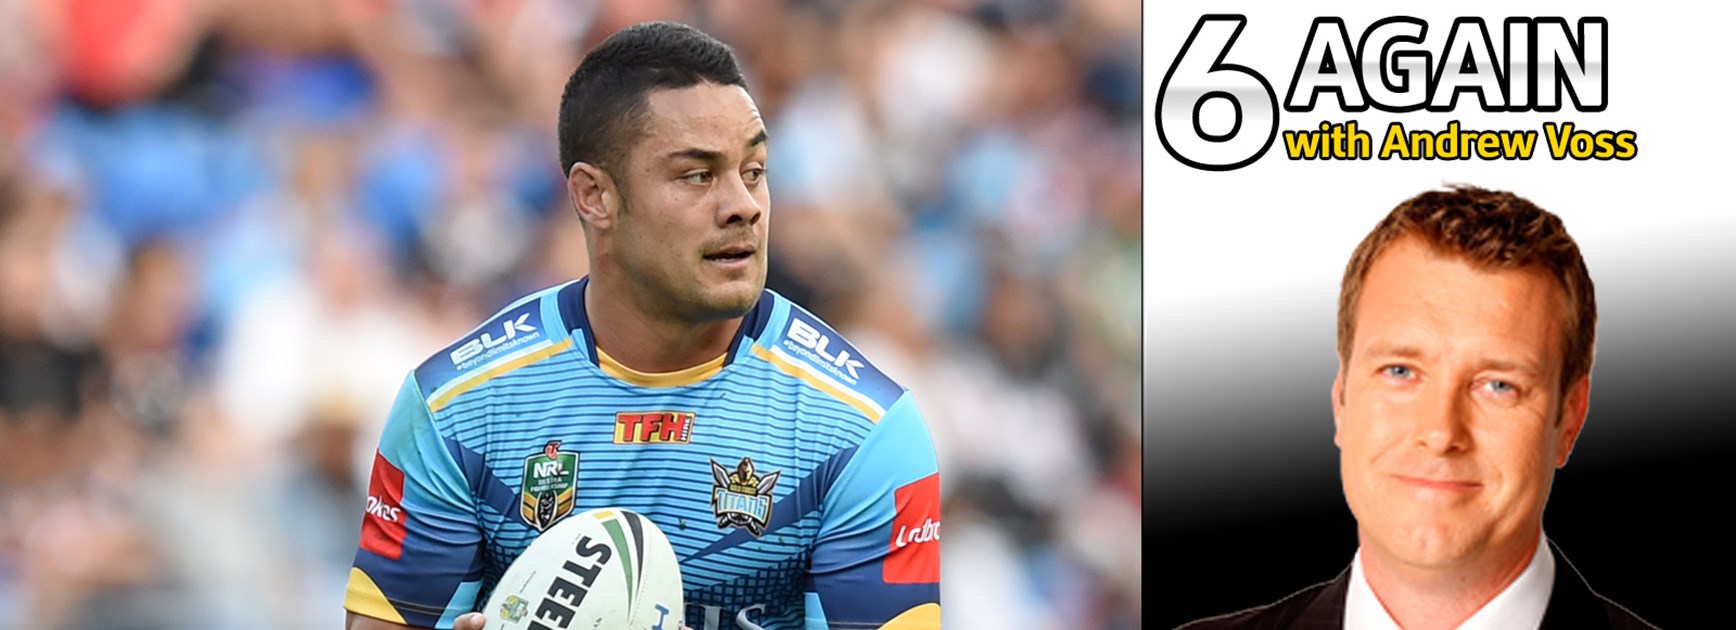 Has Jarryd Hayne delivered for the Gold Coast Titans? Andrew Voss has his say.